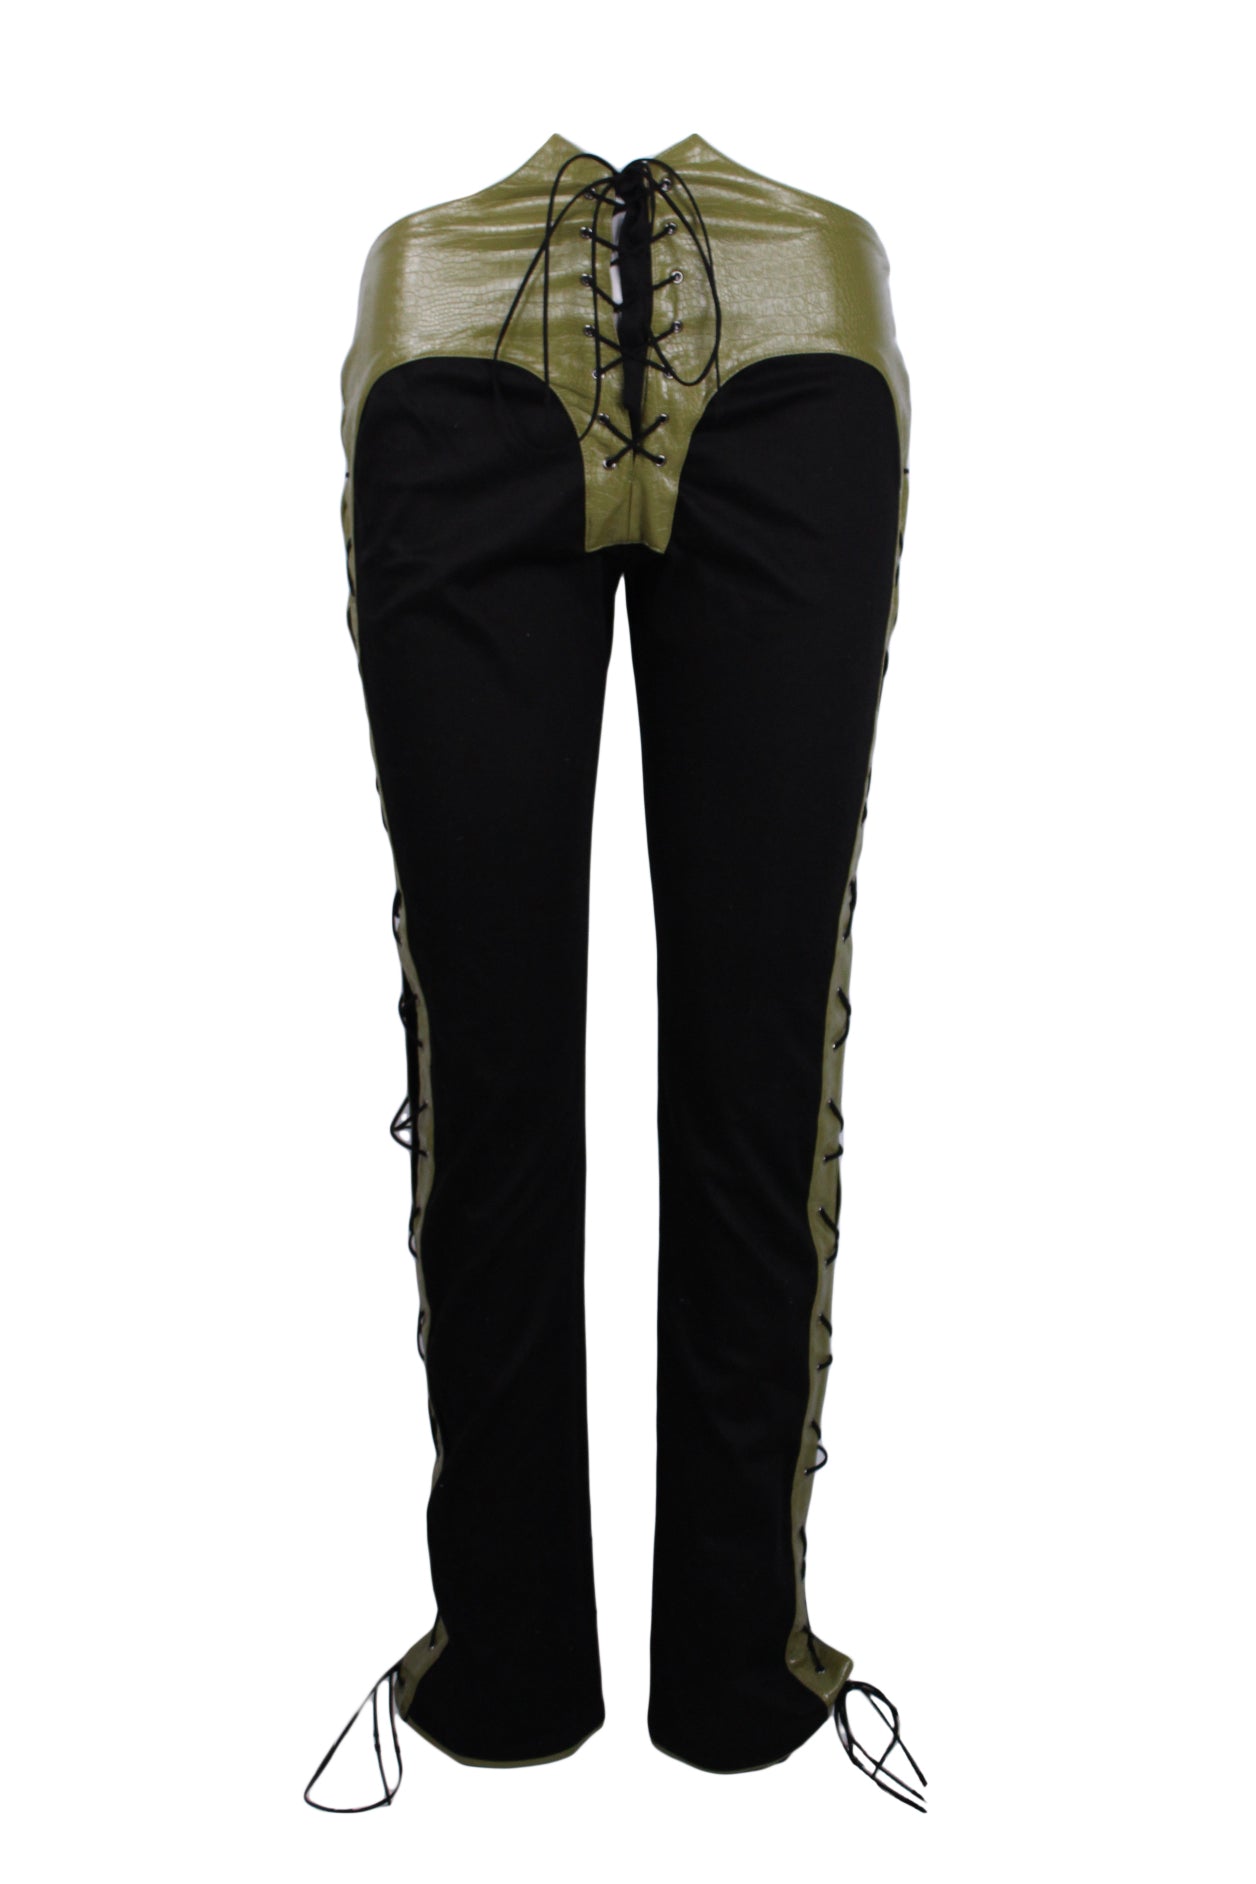 description: anonie green leather black pants. features tie closure at front, tie detailing at sides, faux croc print throughout leather and high rise conceptual cut at front. description: anonie green leather black pants. features tie closure at front, tie detailing at sides, faux croc print throughout leather and high rise conceptual cut at front.